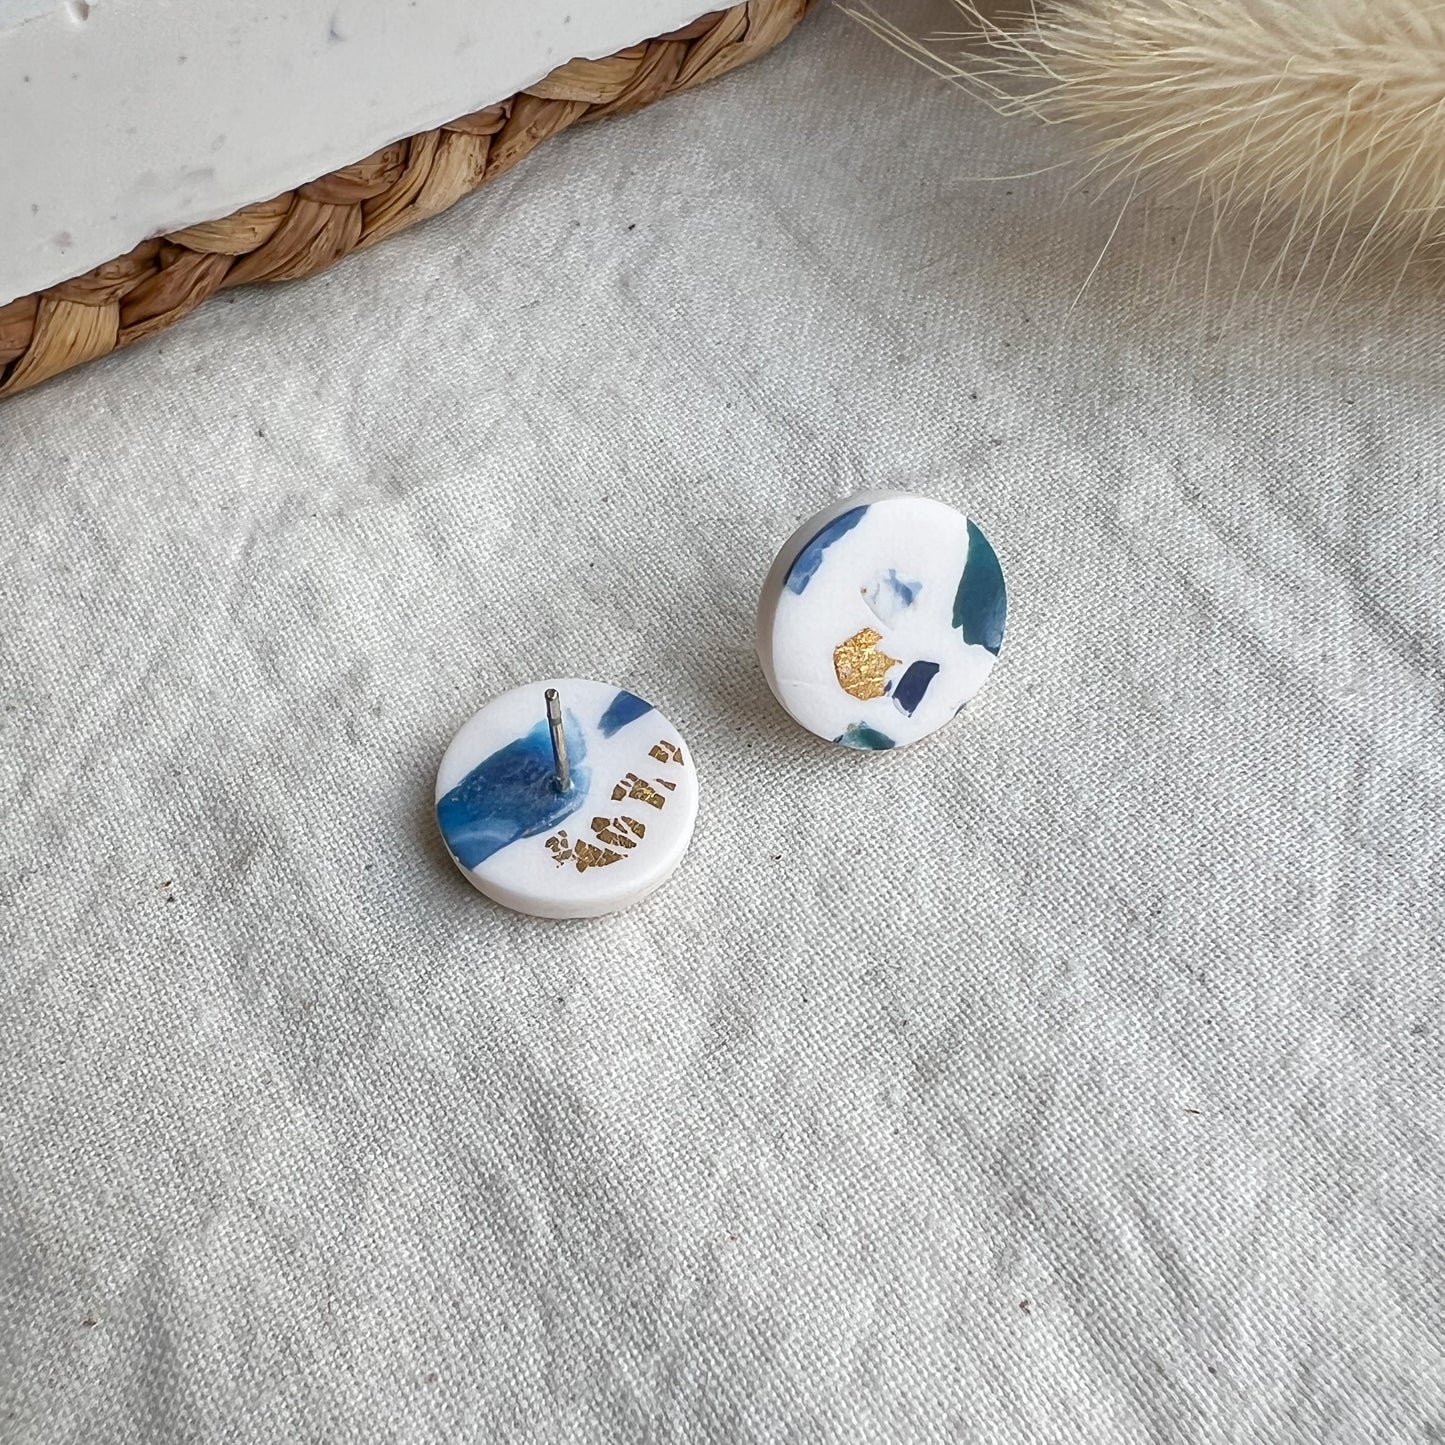 ROUND | Medium round stud earrings in mussel shell blue and white terrazzo